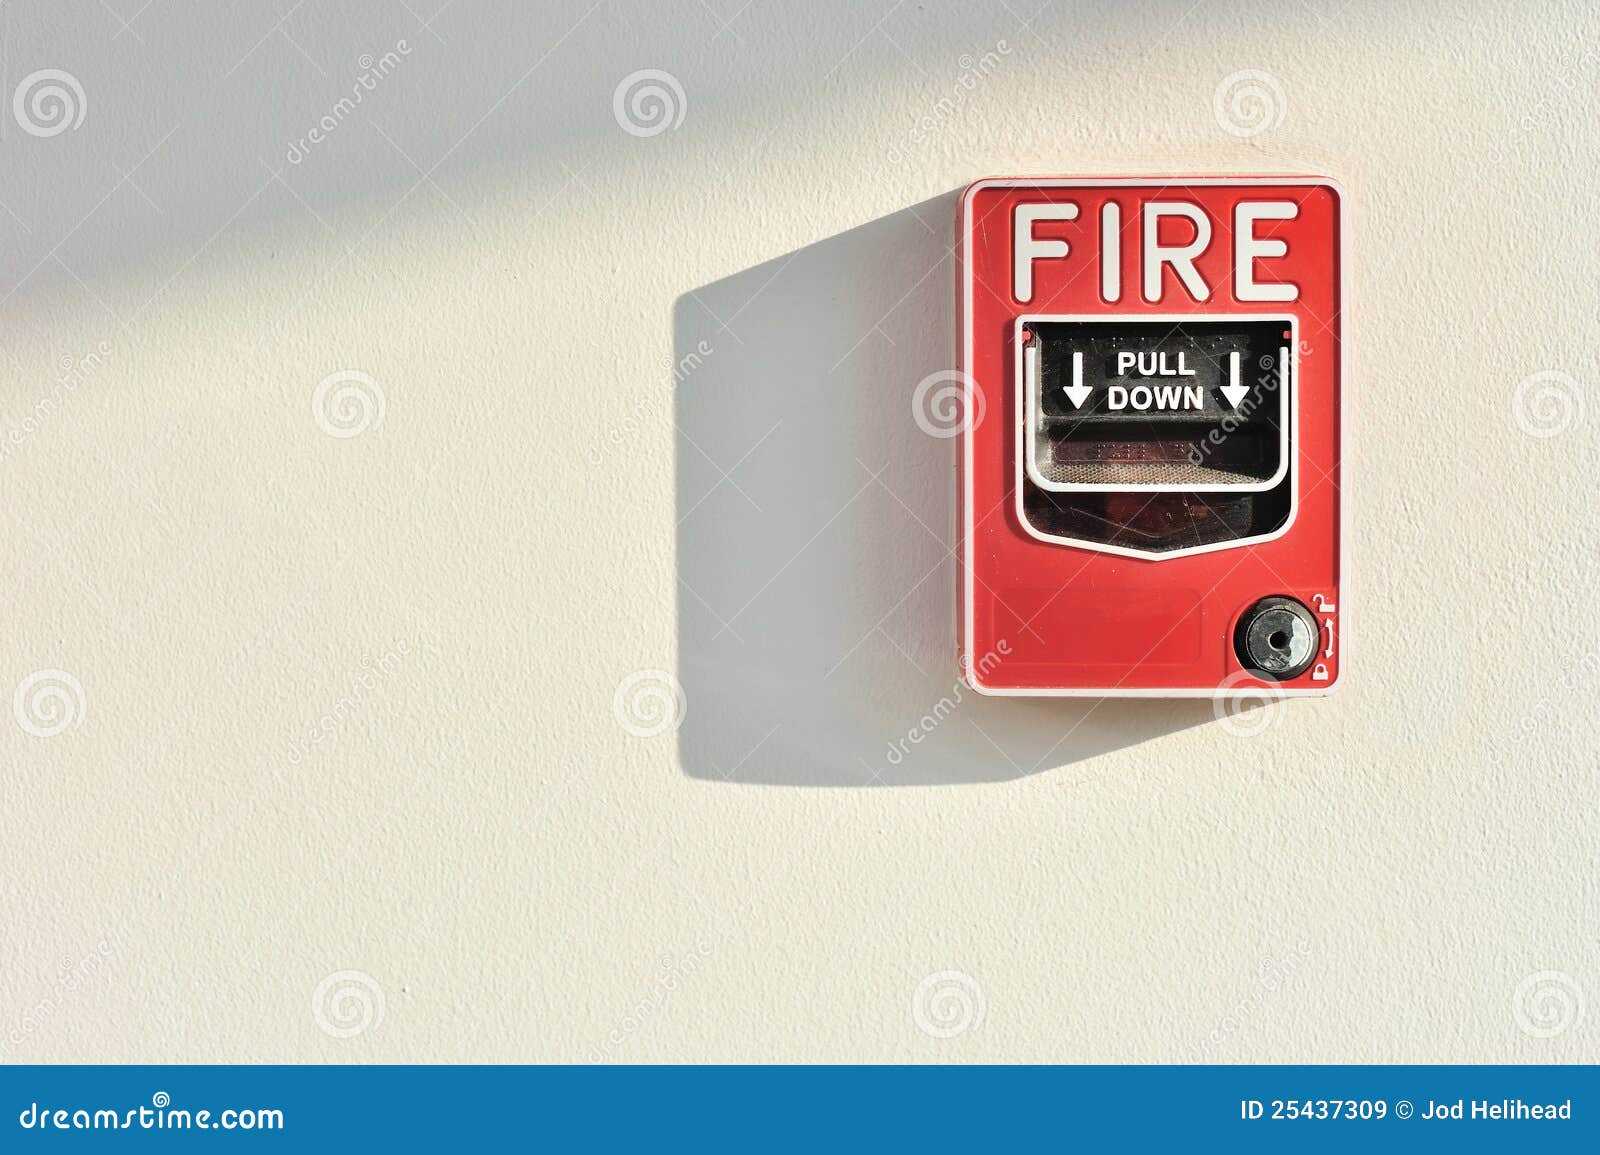 Fire Alarm Activation Switch Stock Image - Image of safe, break: 25437309